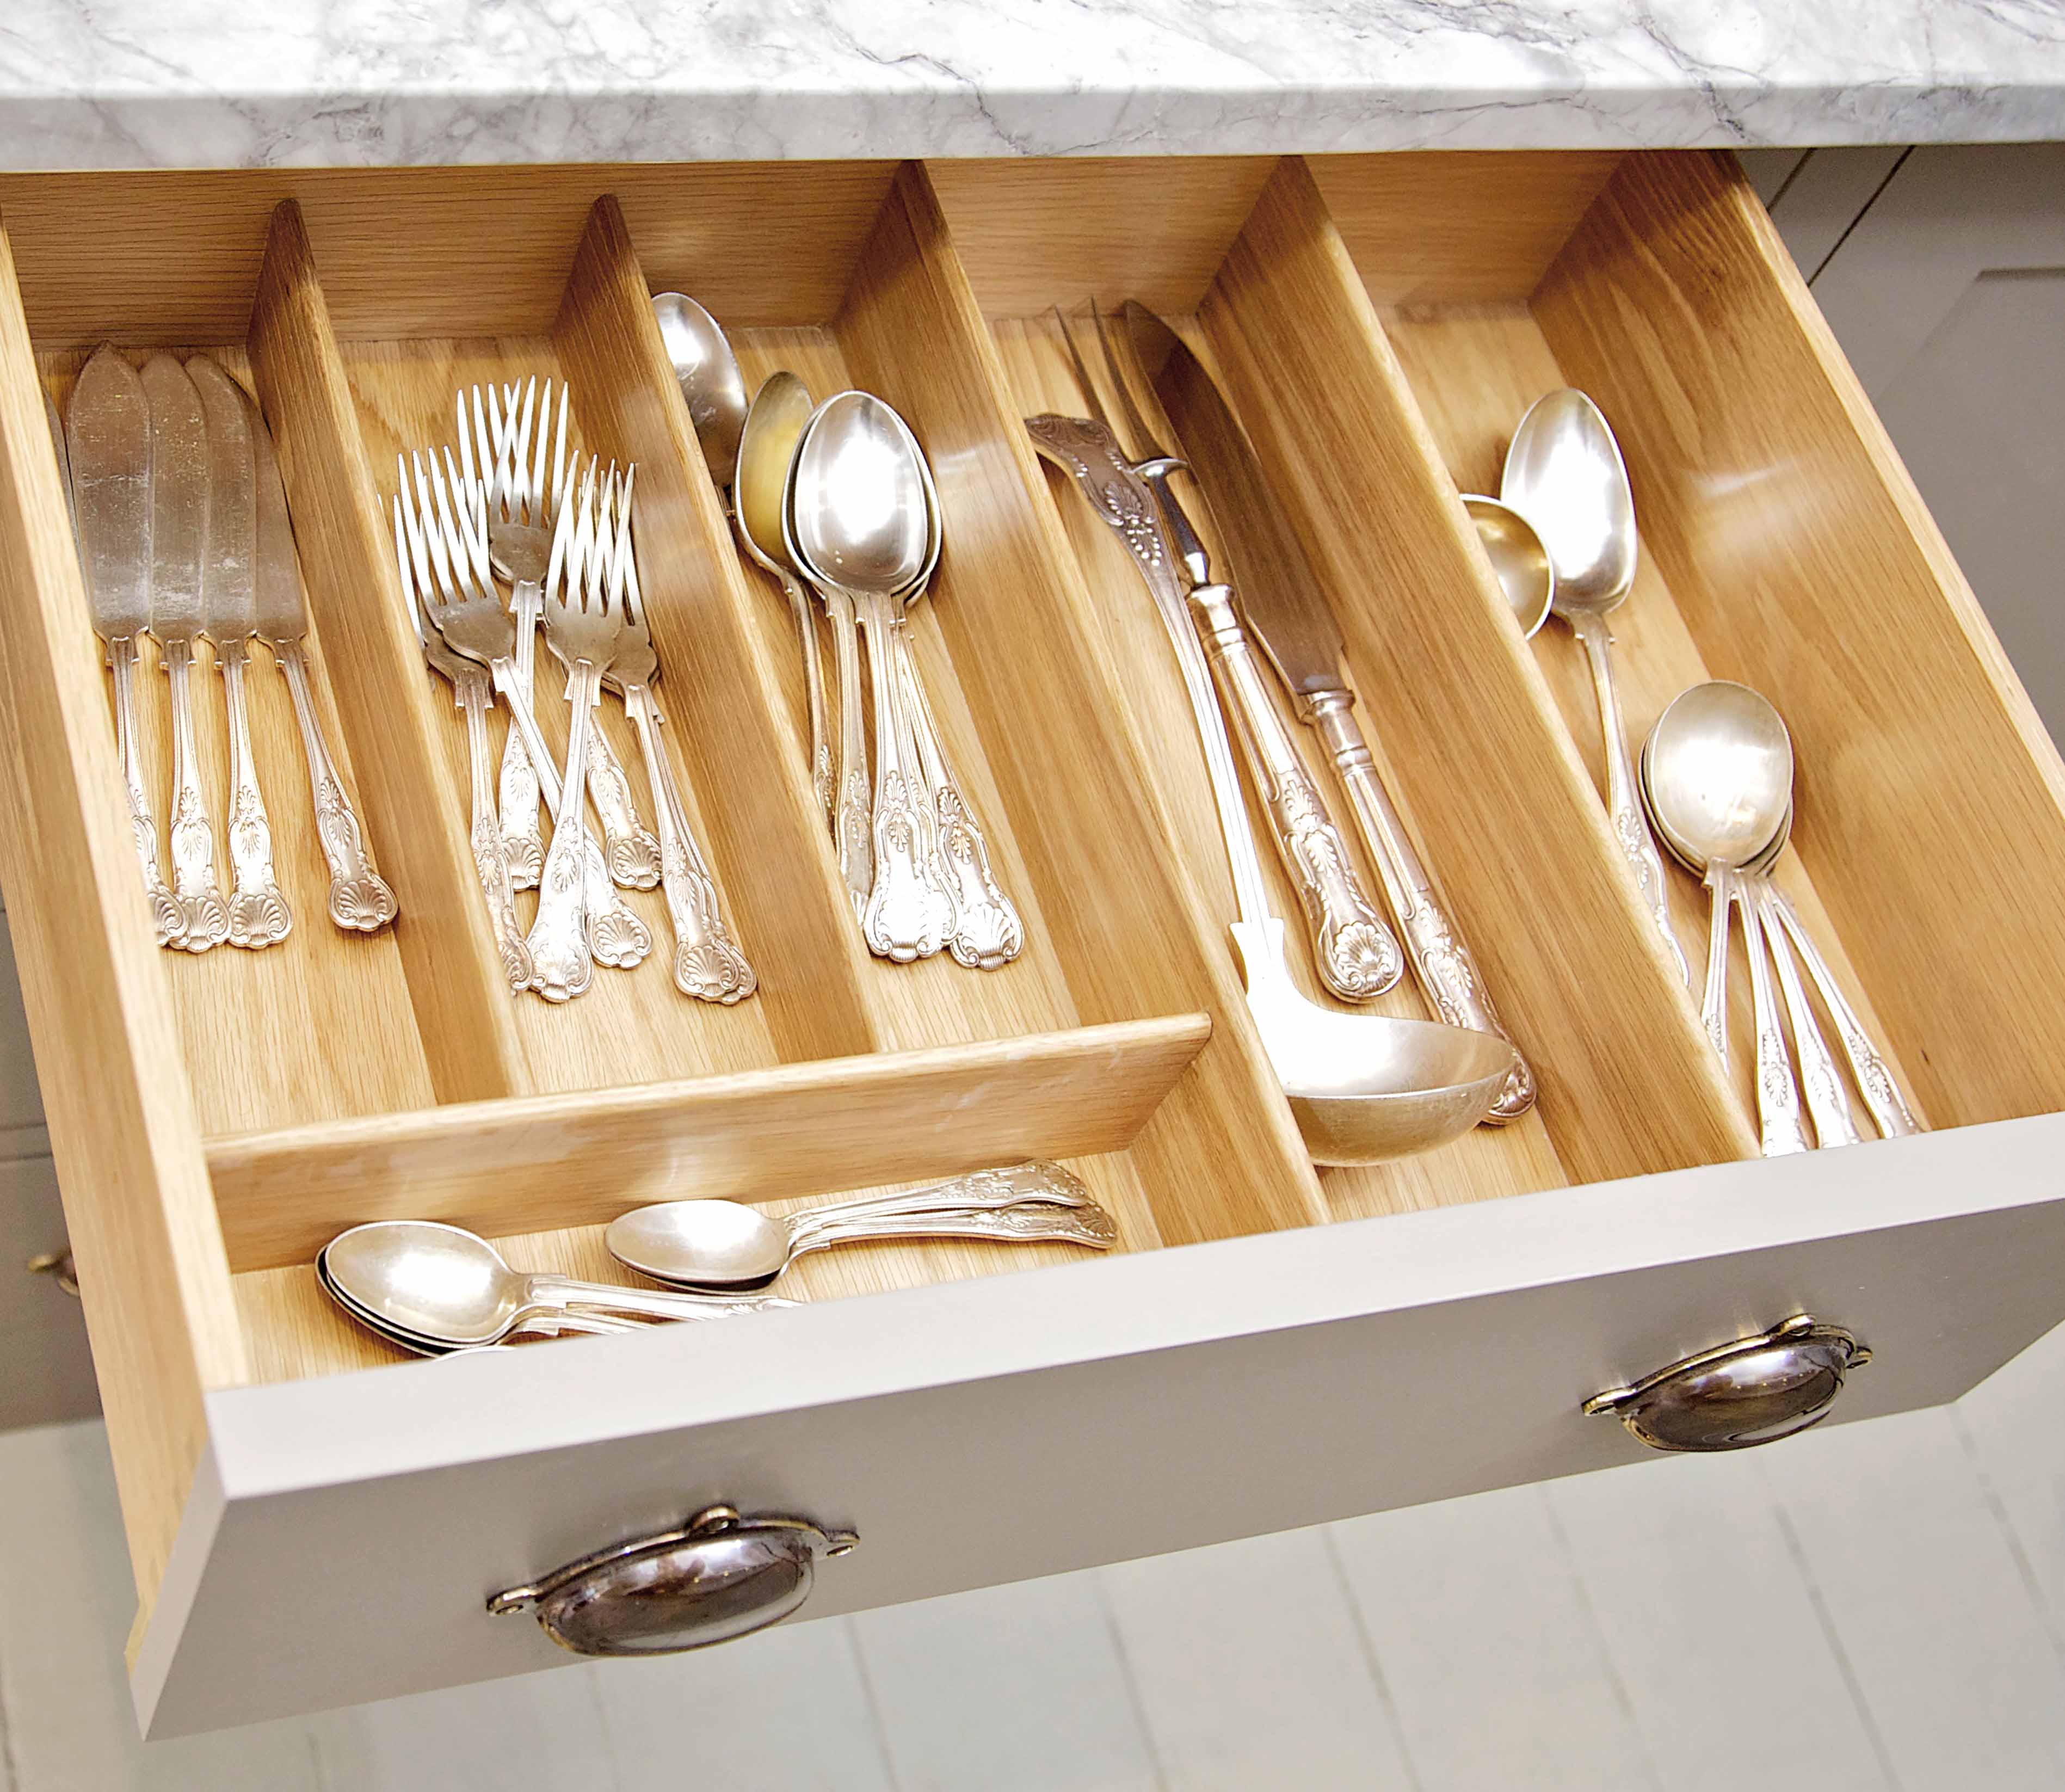 002. Bespoke kitchen shaker style oak cutlery utensil partitioned divider tray Armac Martin Farrow and Ball near Hook, Hampshire